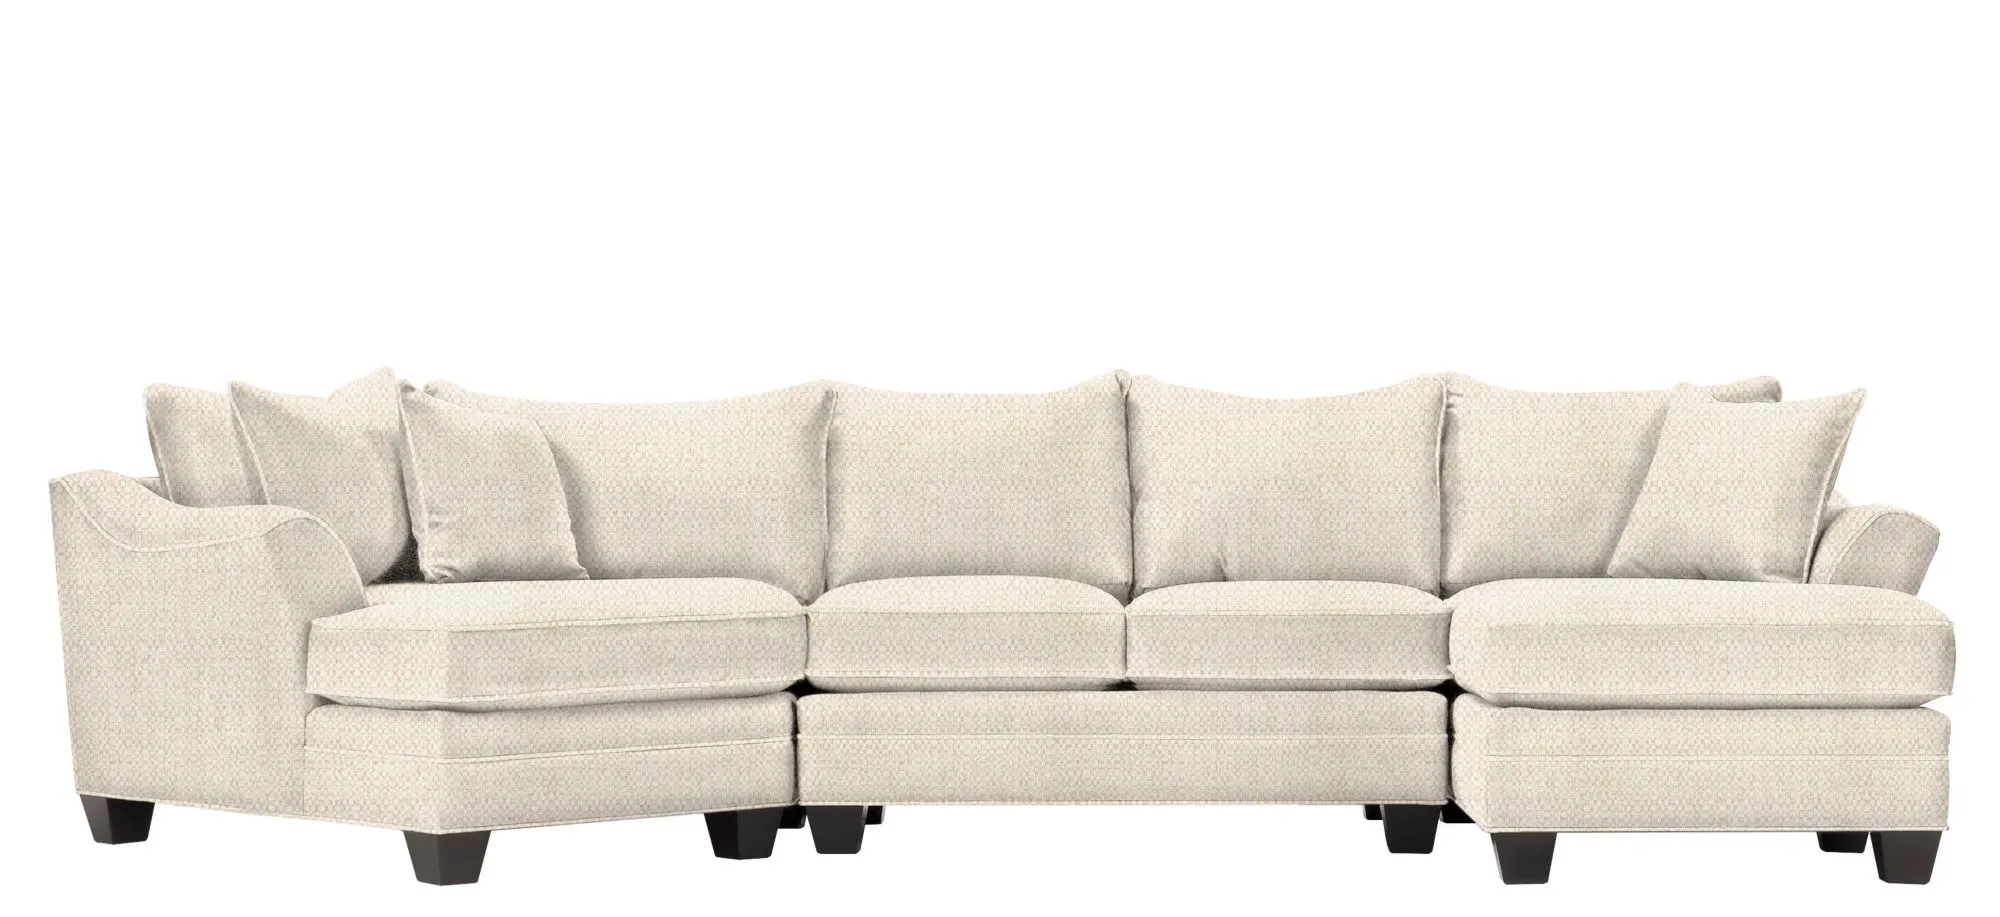 Foresthill 3-pc. Right Hand Facing Sectional Sofa in Sugar Shack Alabaster by H.M. Richards